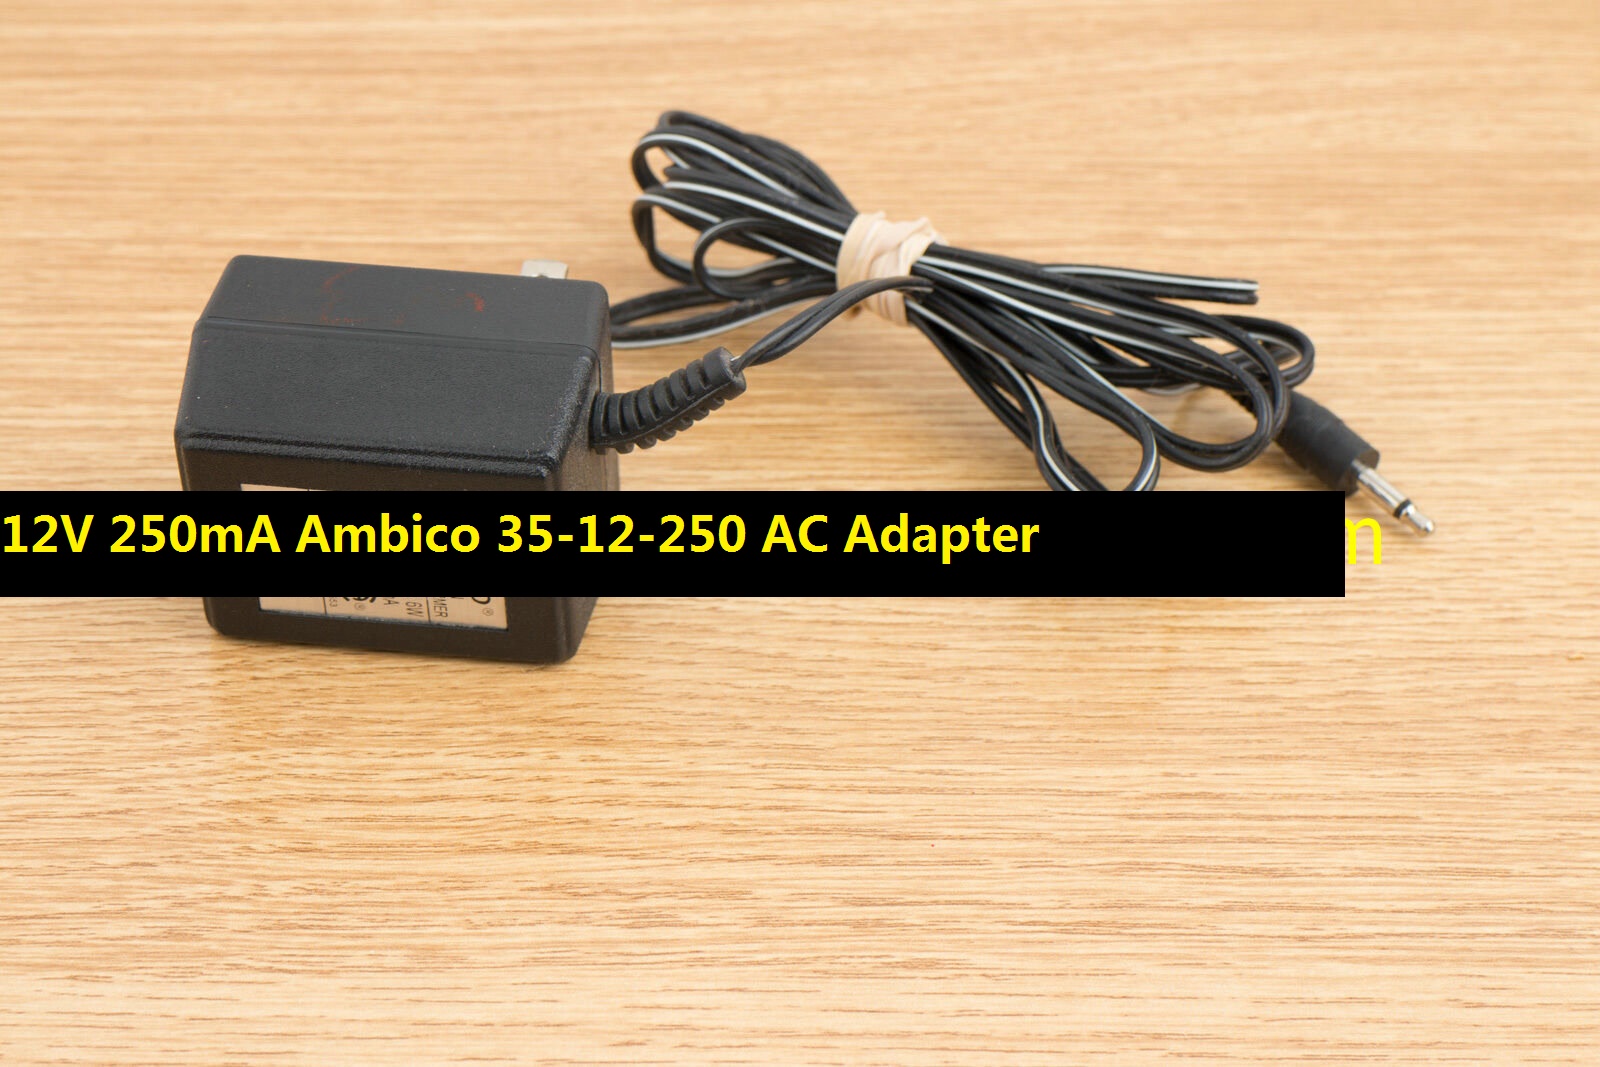 *100% Brand NEW* AC Adapter 12V 250mA Ambico 35-12-250 Power Supply